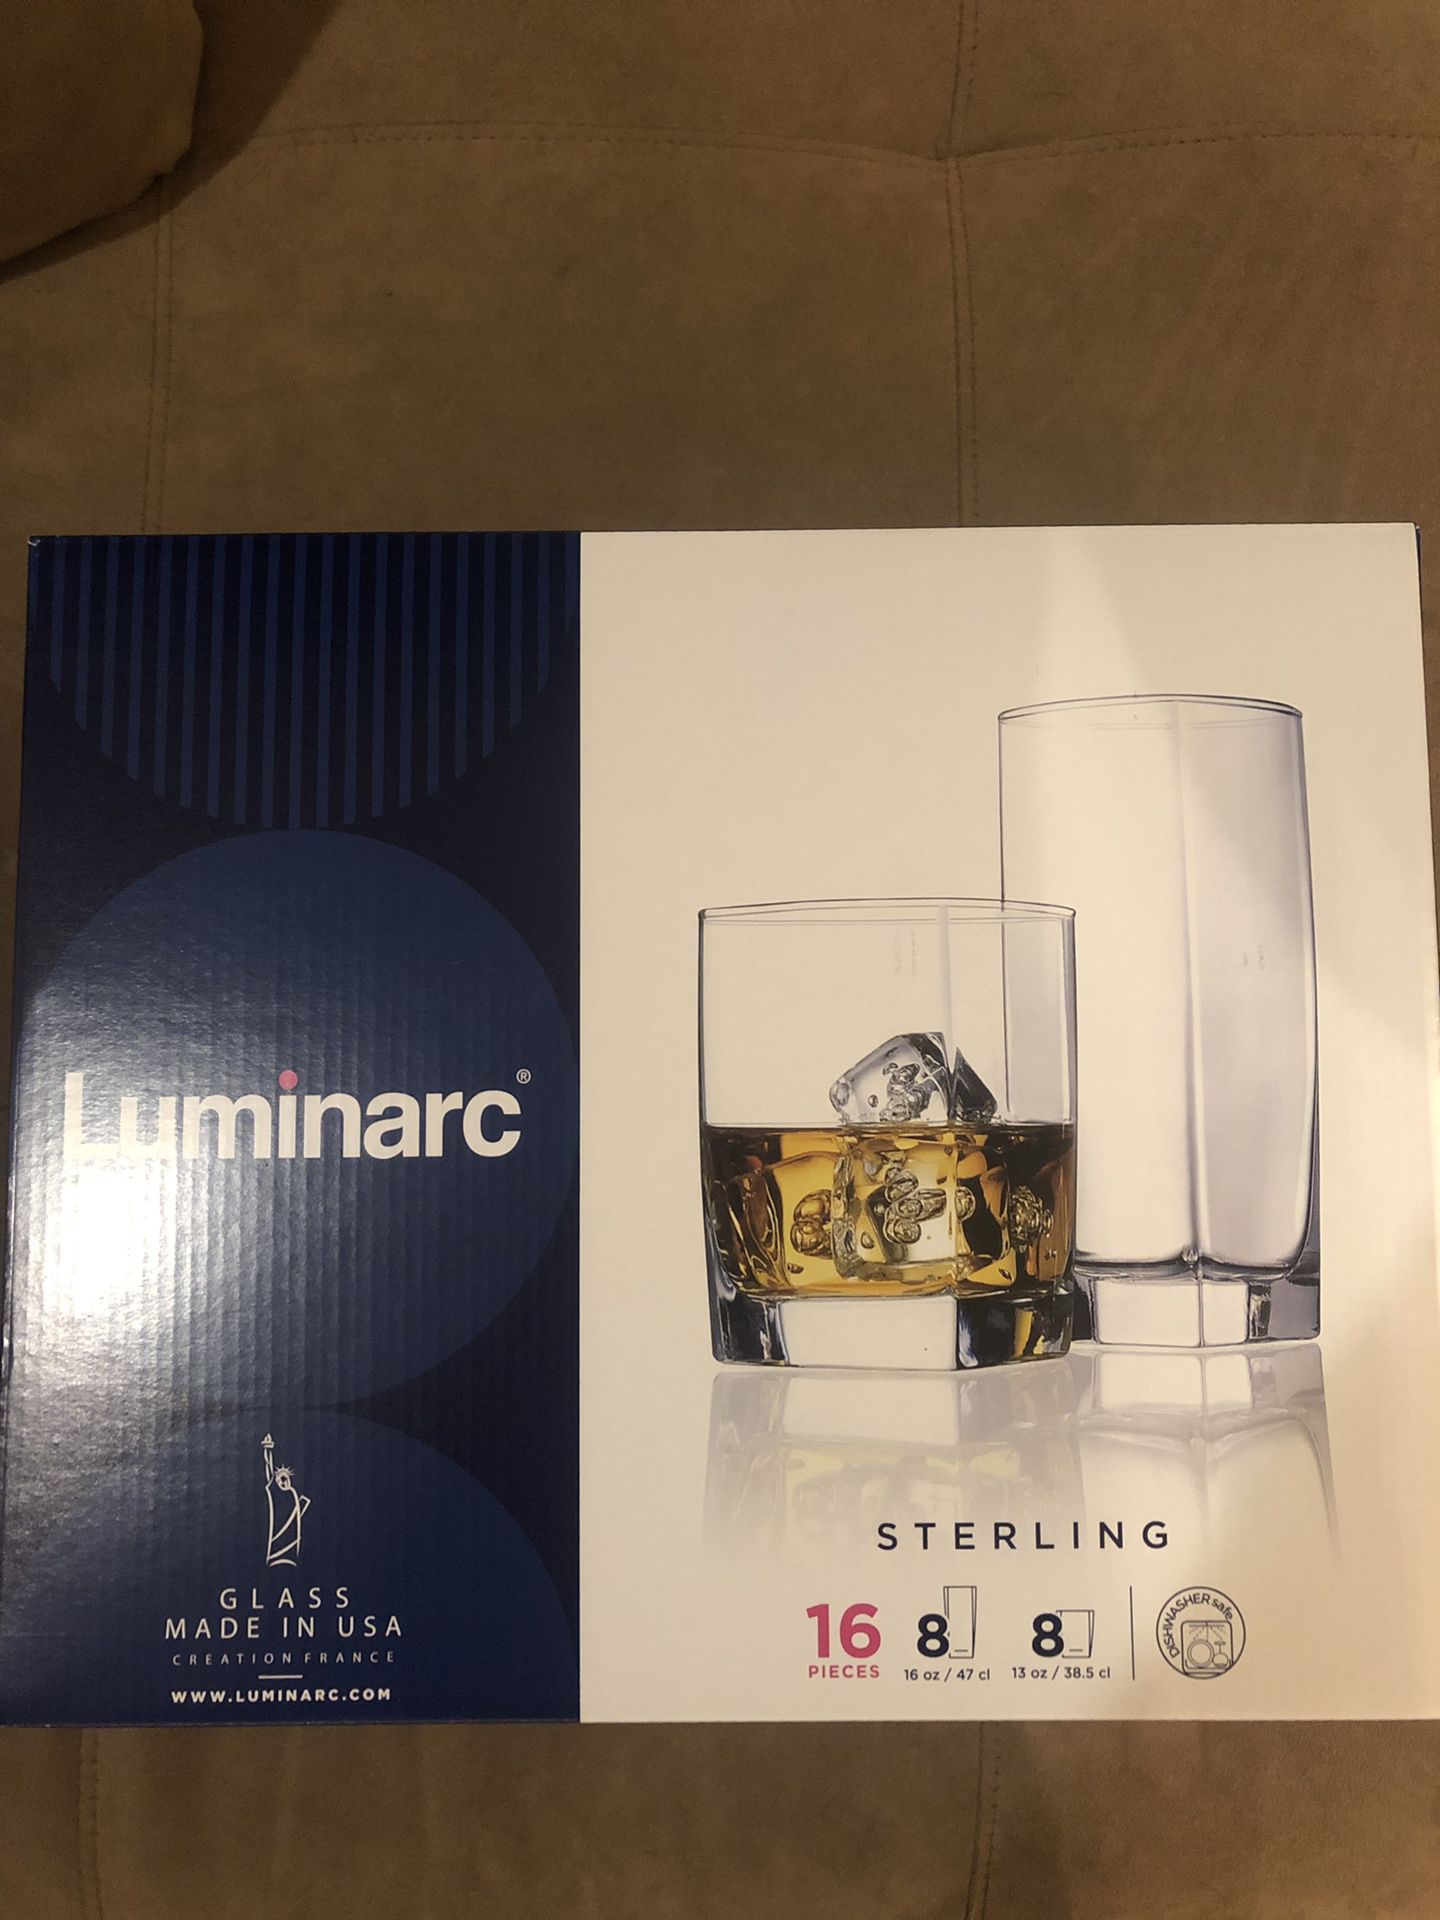 LUMINARC STERLING 16 PIECE GLASSWARE SET 8 16 OUNCE TALL GLASSES 8 13 OZ ROCKS GLASSES TUMBLERS BRAND NEW NEVER OPENED IN ORIGINAL BOX PACKAGING MADE